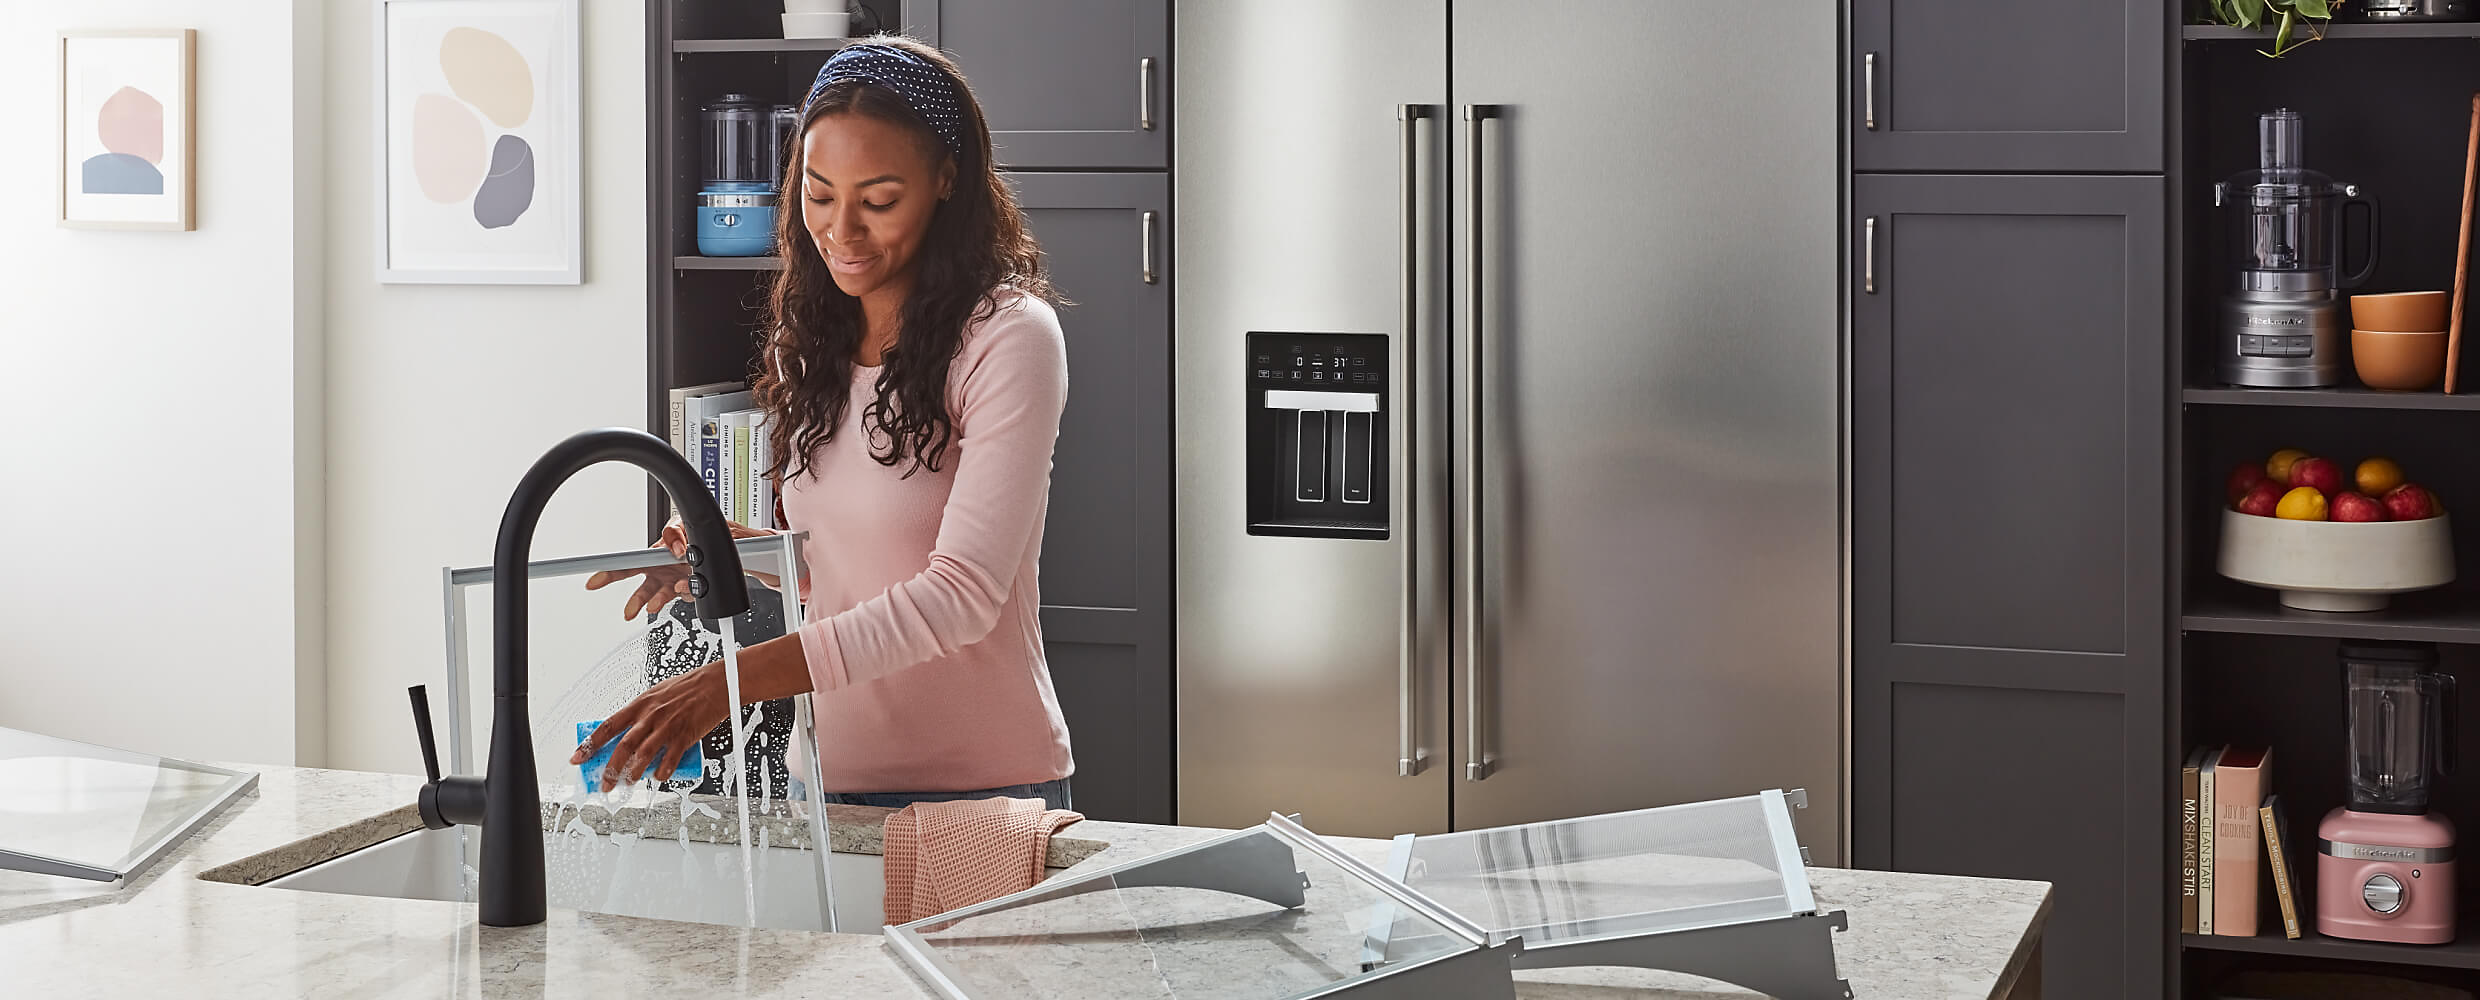 36" KitchenAid® Built-In Side-by-Side Refrigerator featured in the kitchen with a maker rinsing the bins and shelves